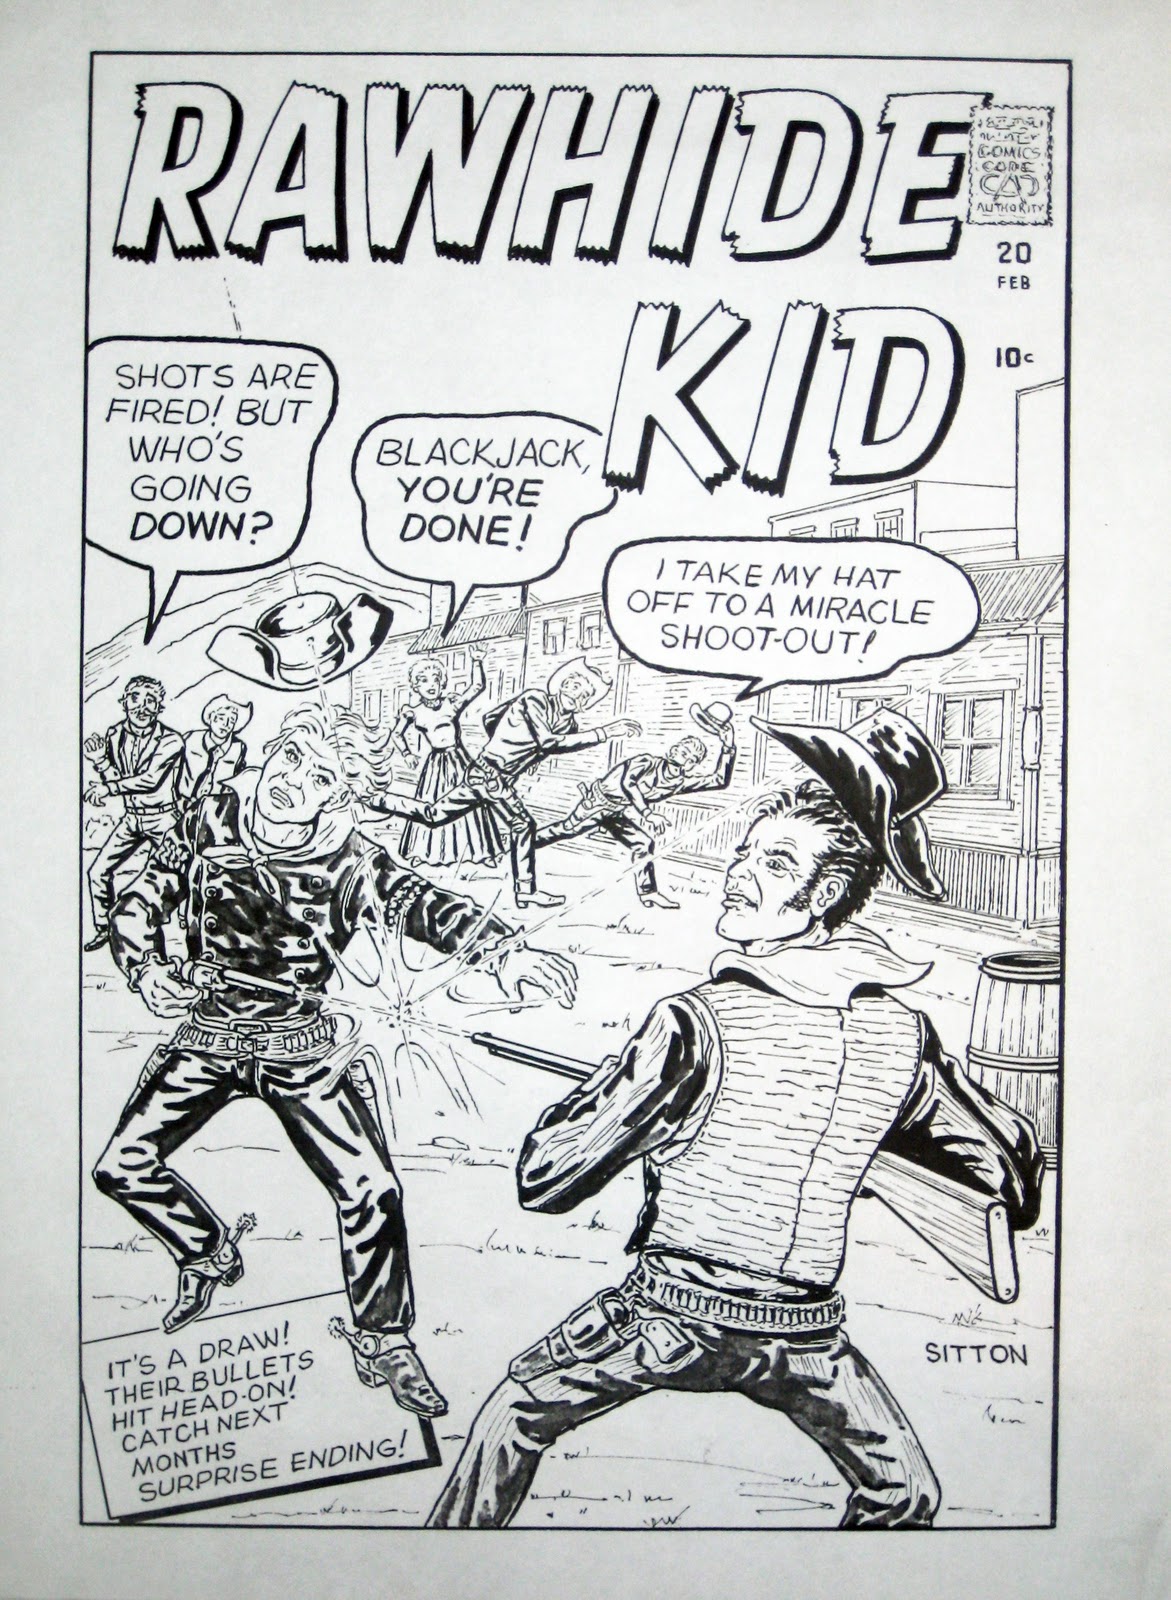 RAWHIDE KID 20 one minute later [From the collection of Michael Finn]